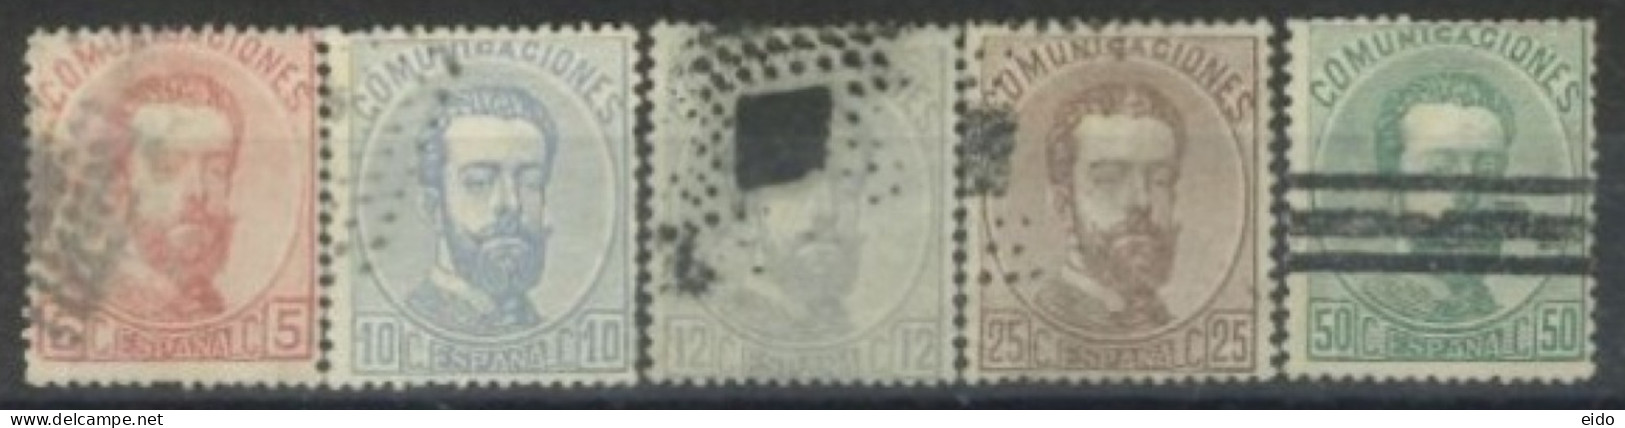 SPAIN,  1872/73 - KING AMADEO STAMP, # 178.181/82,184, & 186, USED. - Oblitérés